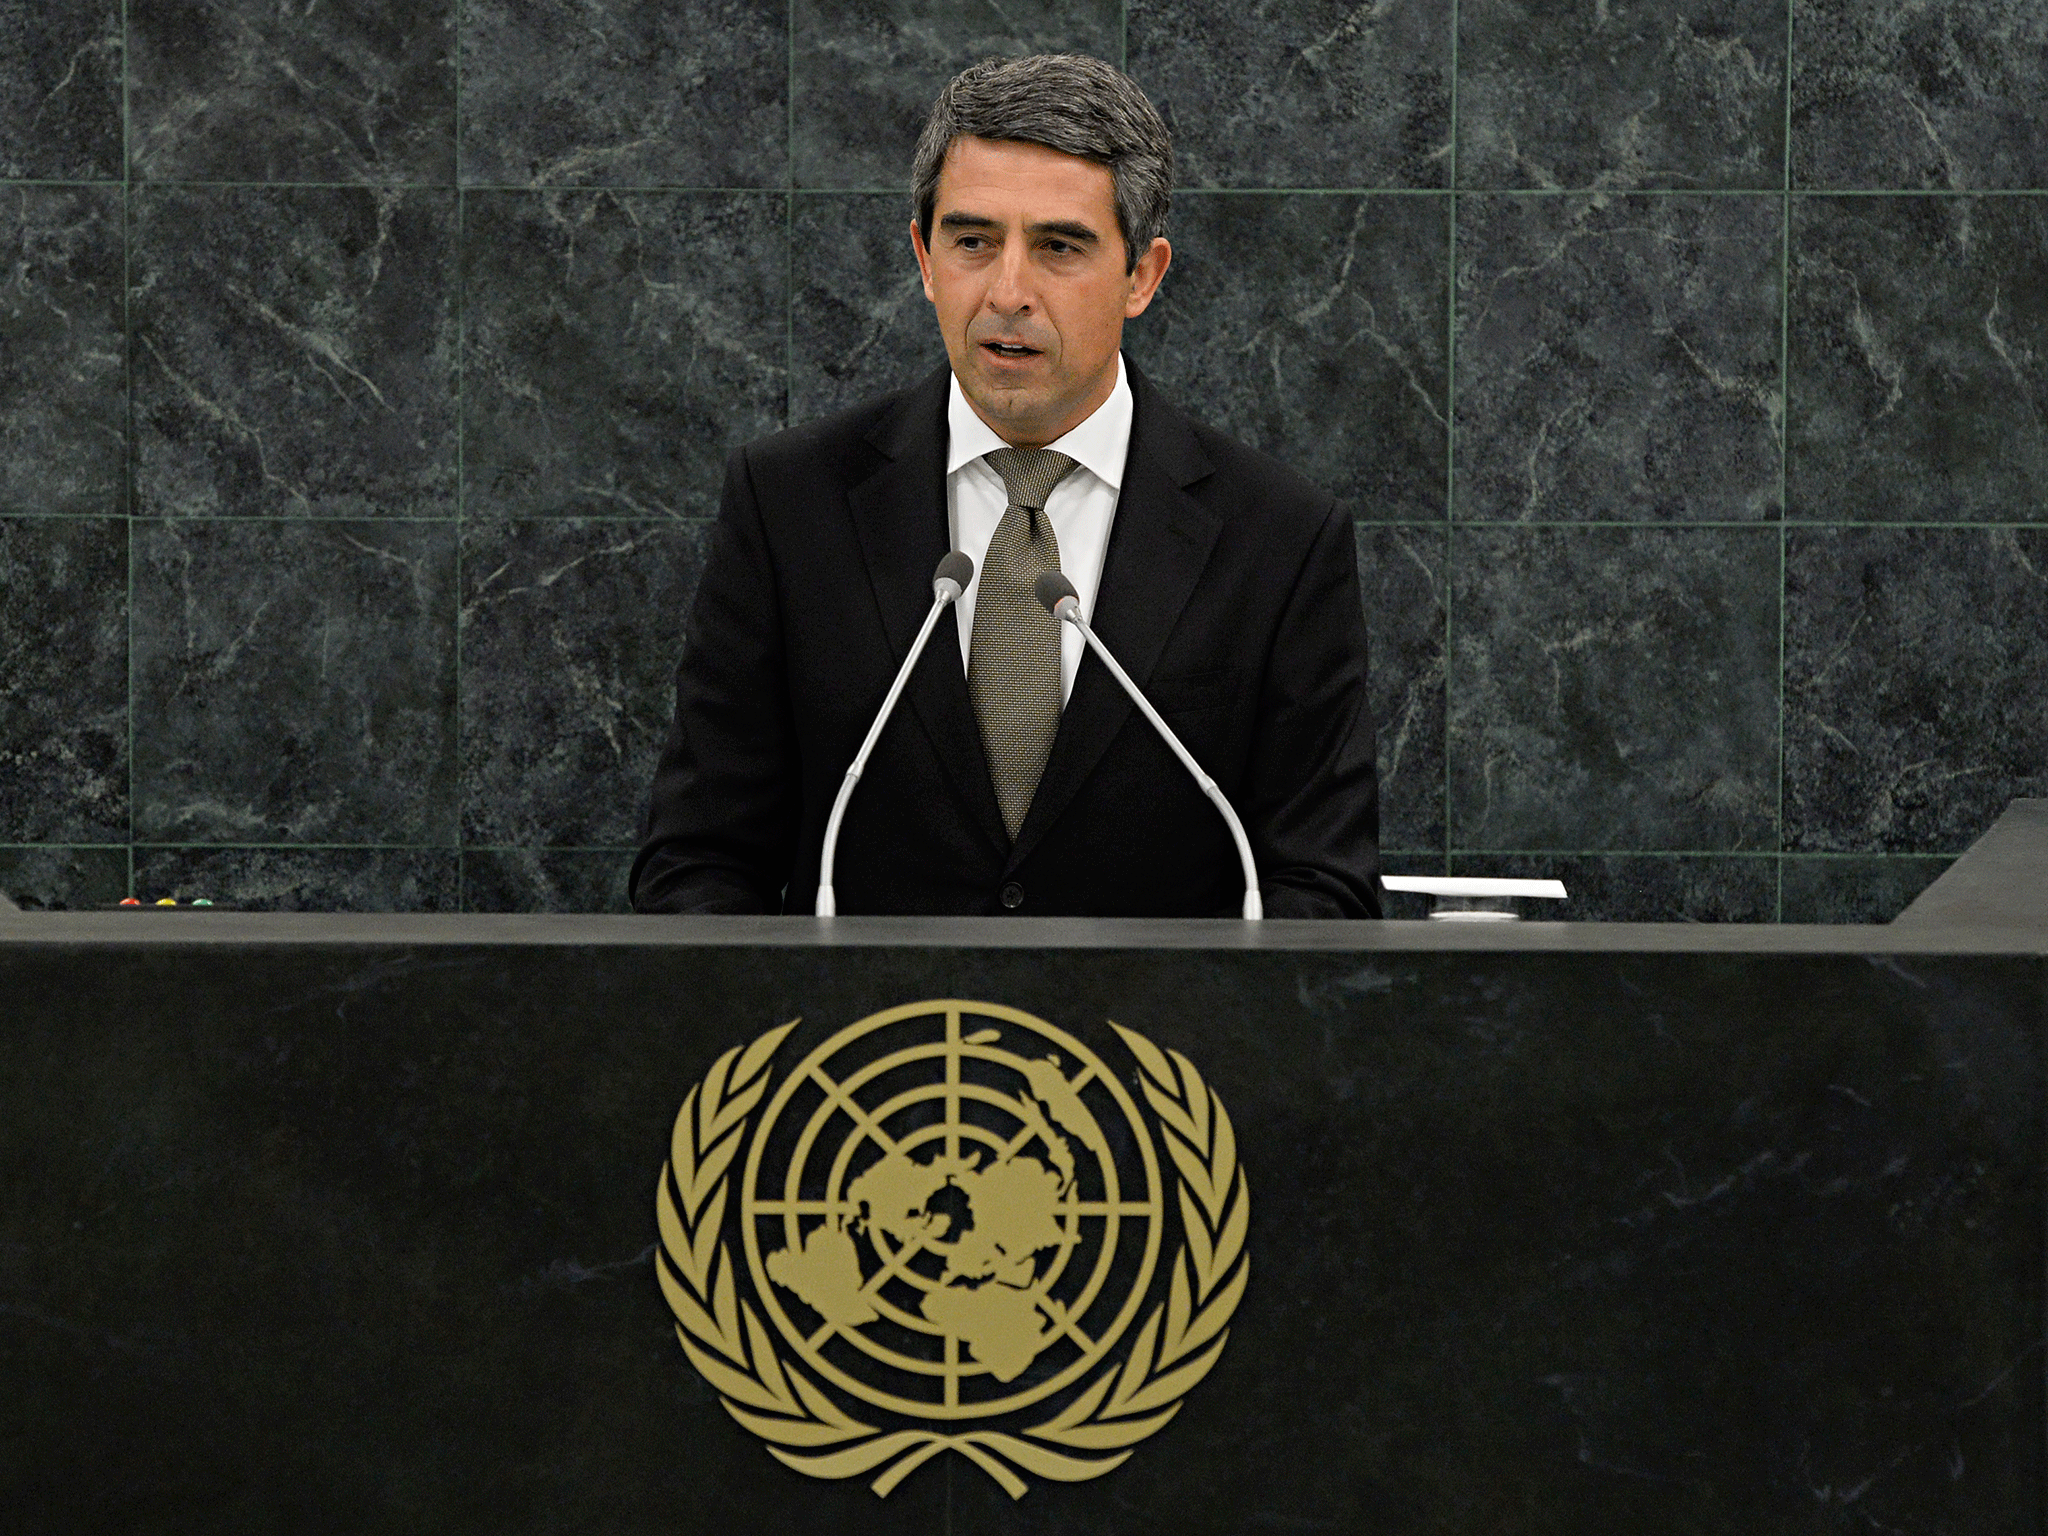 Rosen Plevneliev, at the United Nations General Assembly, said Britain and Bulgaria should remain close friends despite Brexit